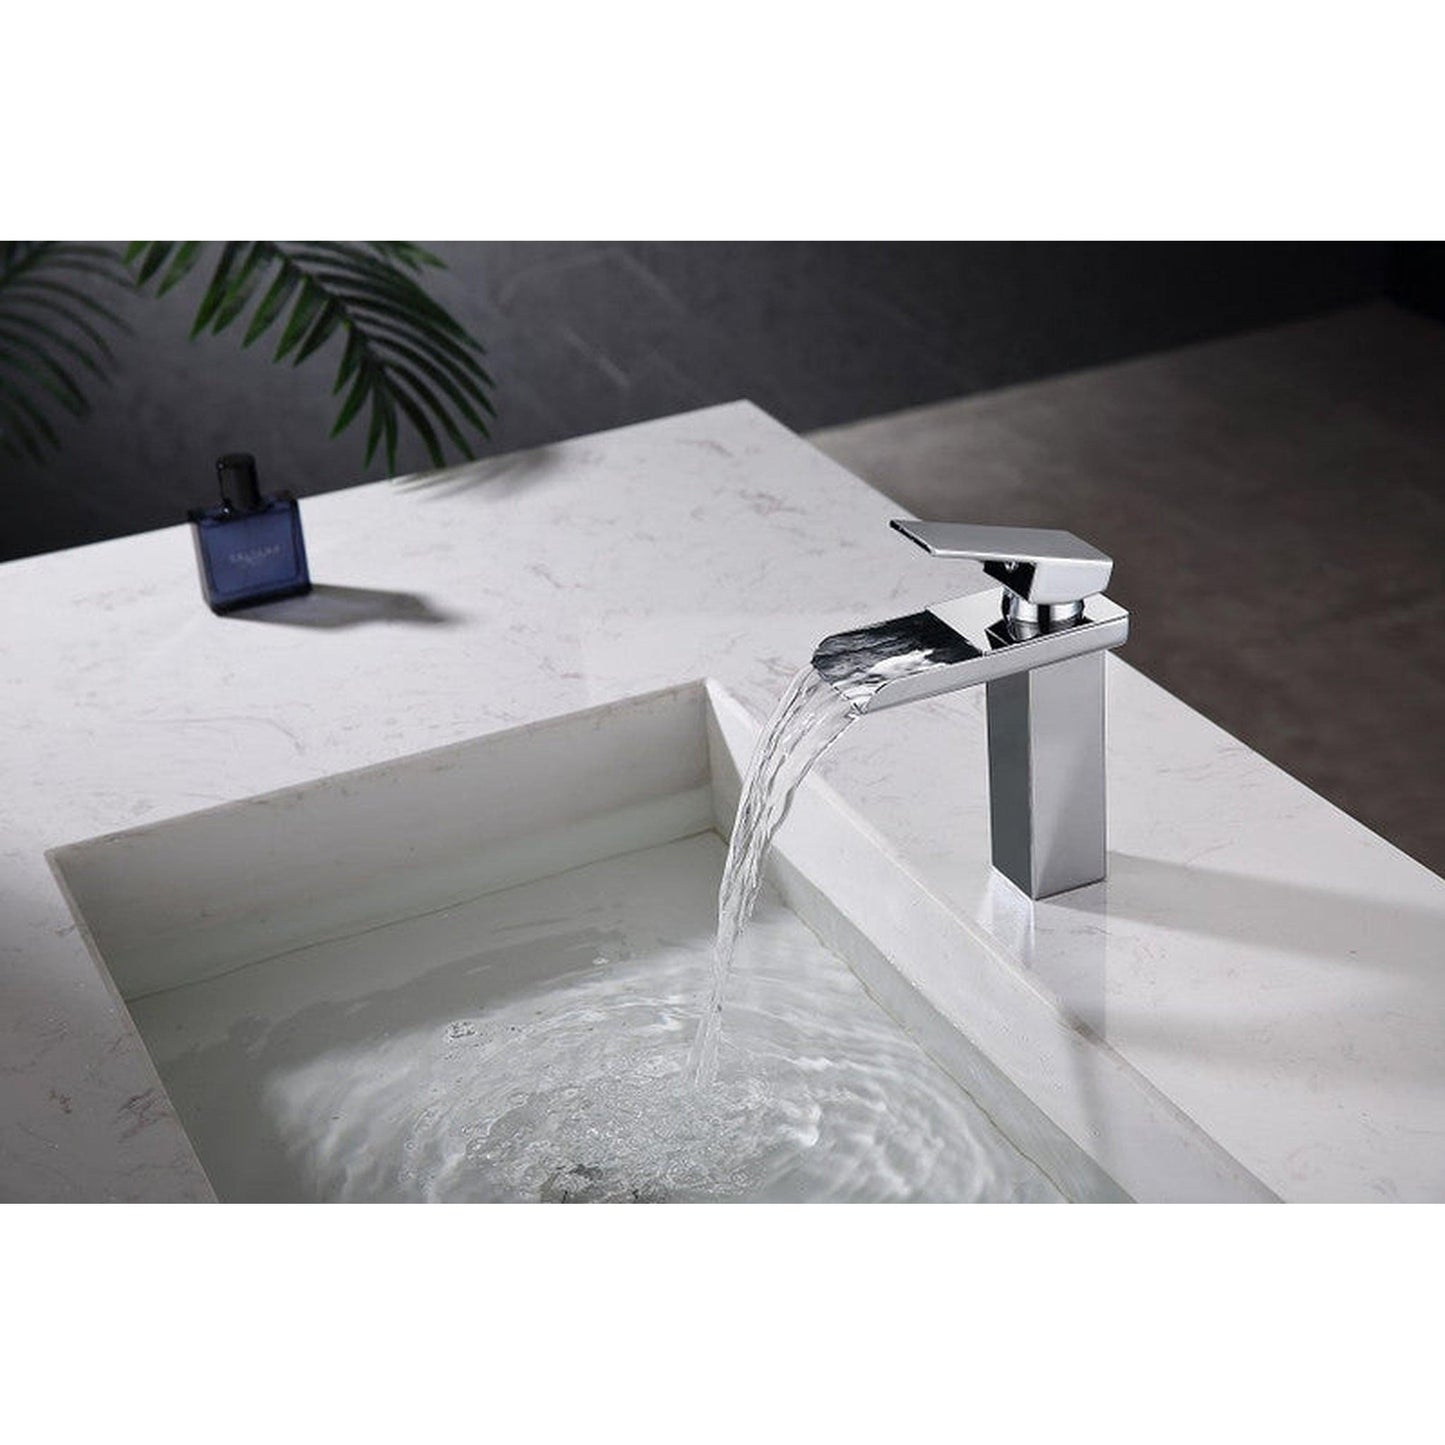 Moreno Nelli 6" x 7" Single Hole Brushed Nickel Waterfall Faucet